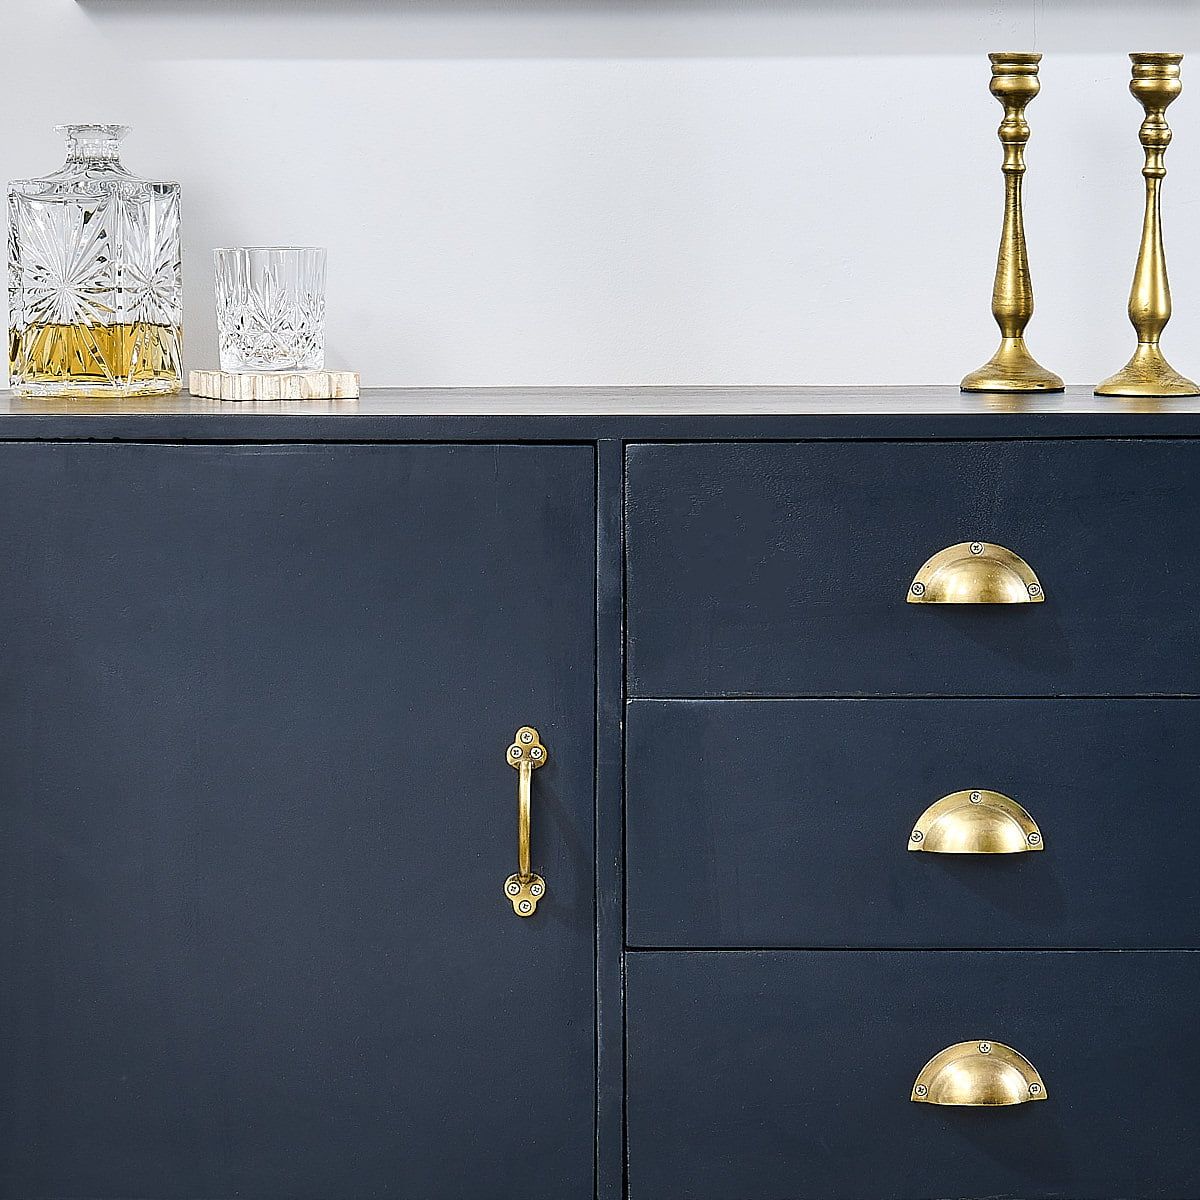 Antique Blue Sideboard Navy – Ellie – Zaza Homes In Navy Blue Sideboards (View 12 of 15)